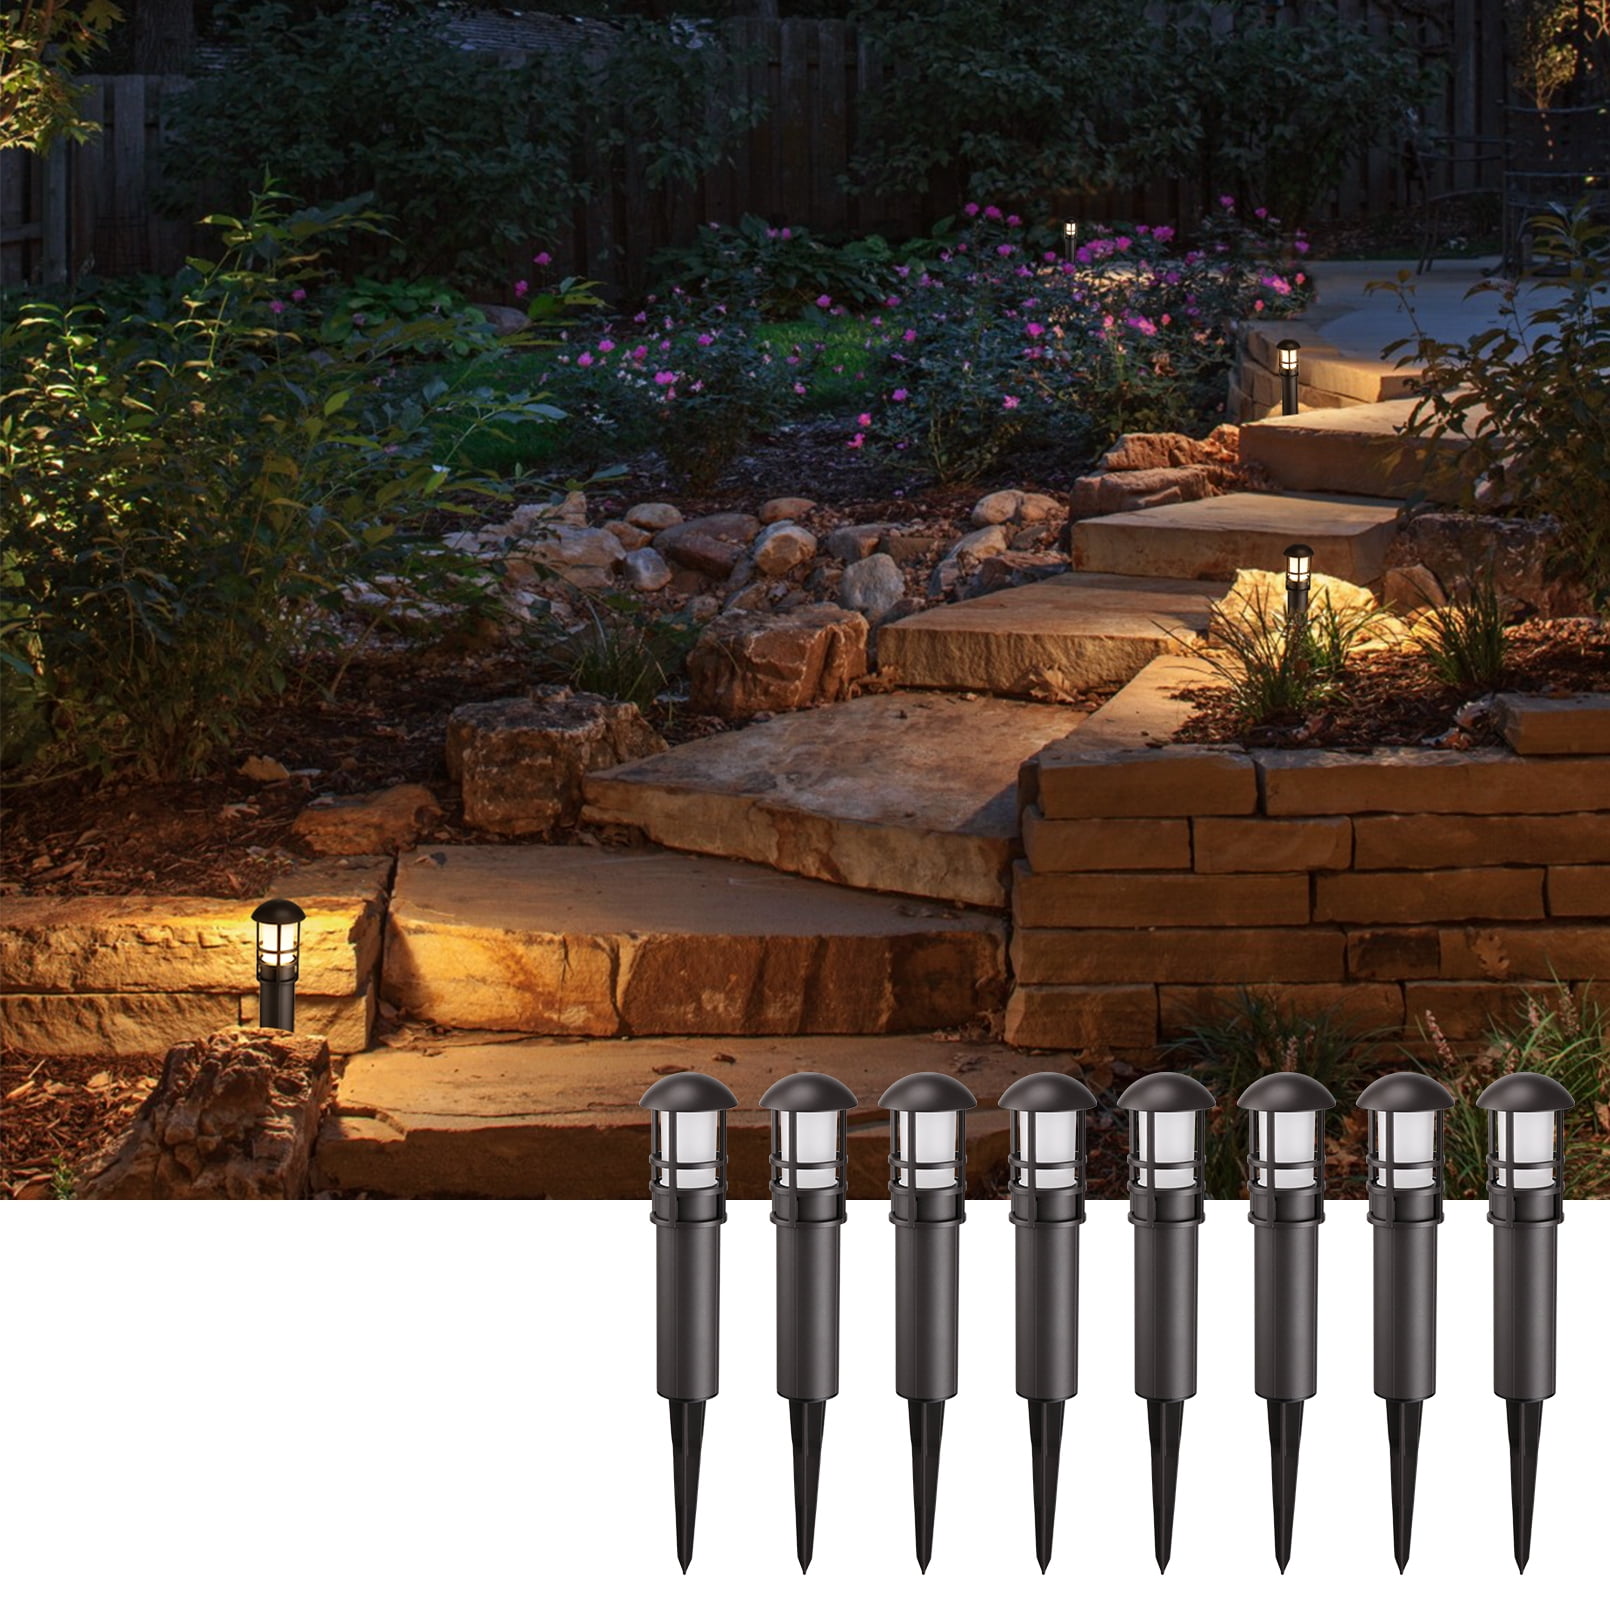 3W LED in Ground Lights Outdoor Landscape Lights Warm White Pathway Lights 3 